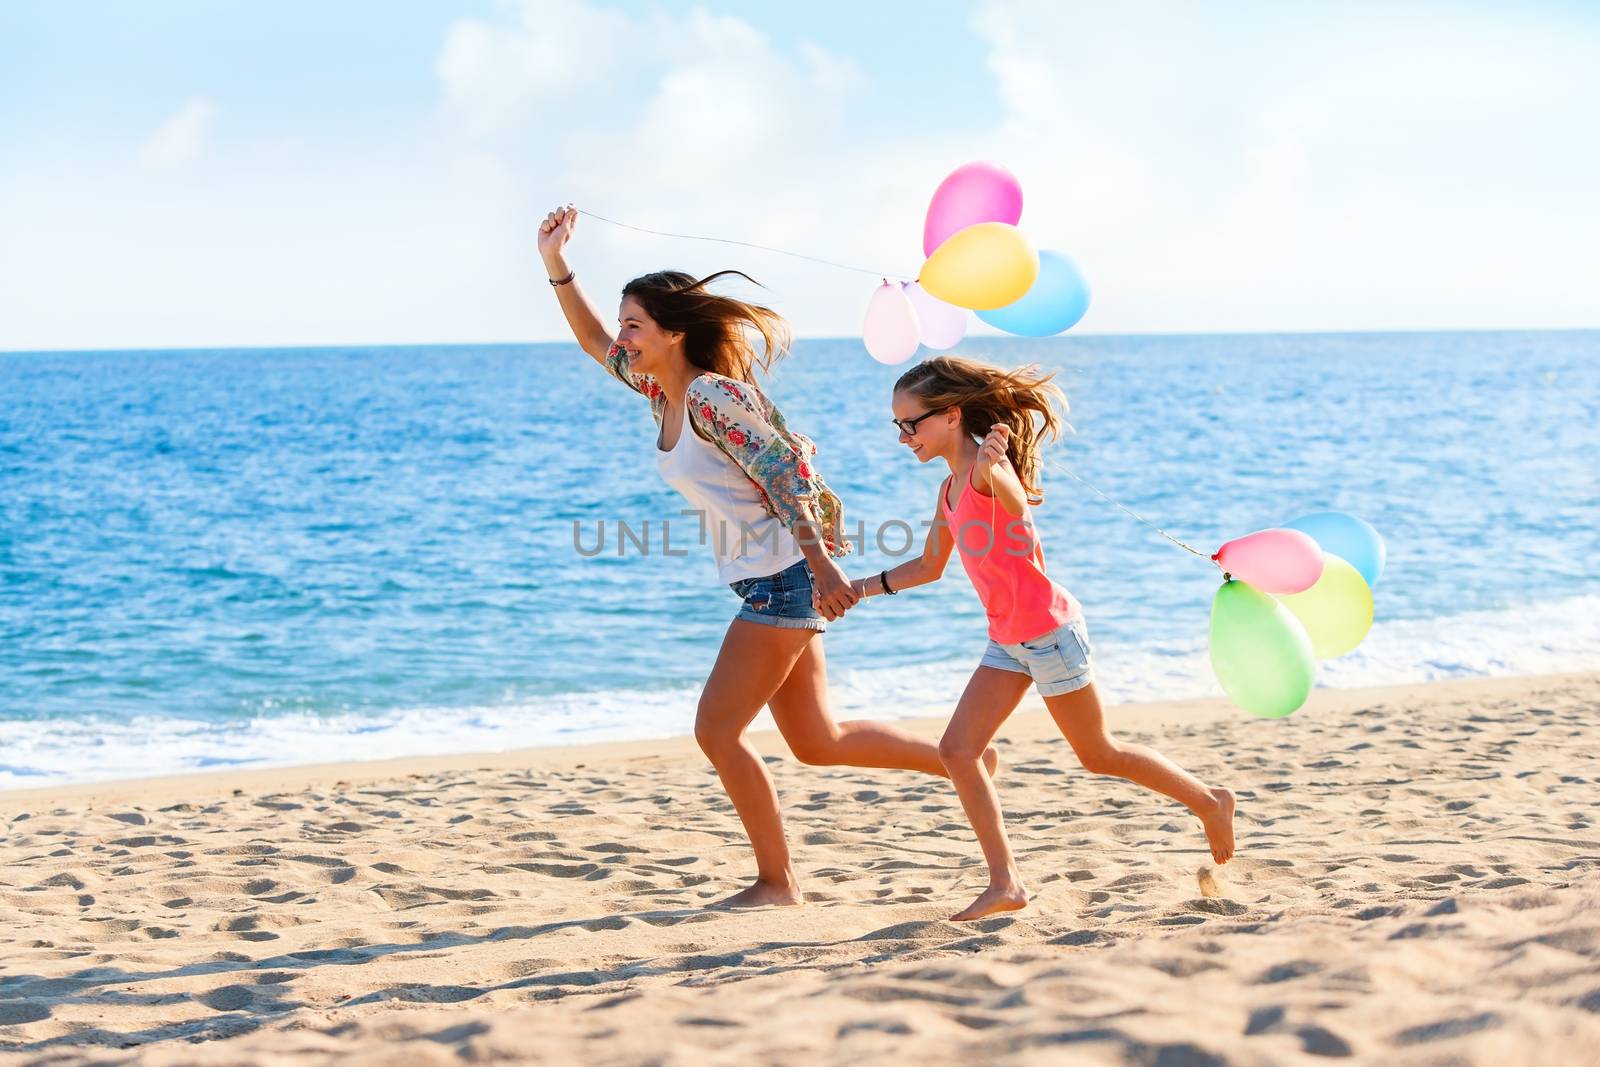 Young girls running with balloons on beach. by karelnoppe